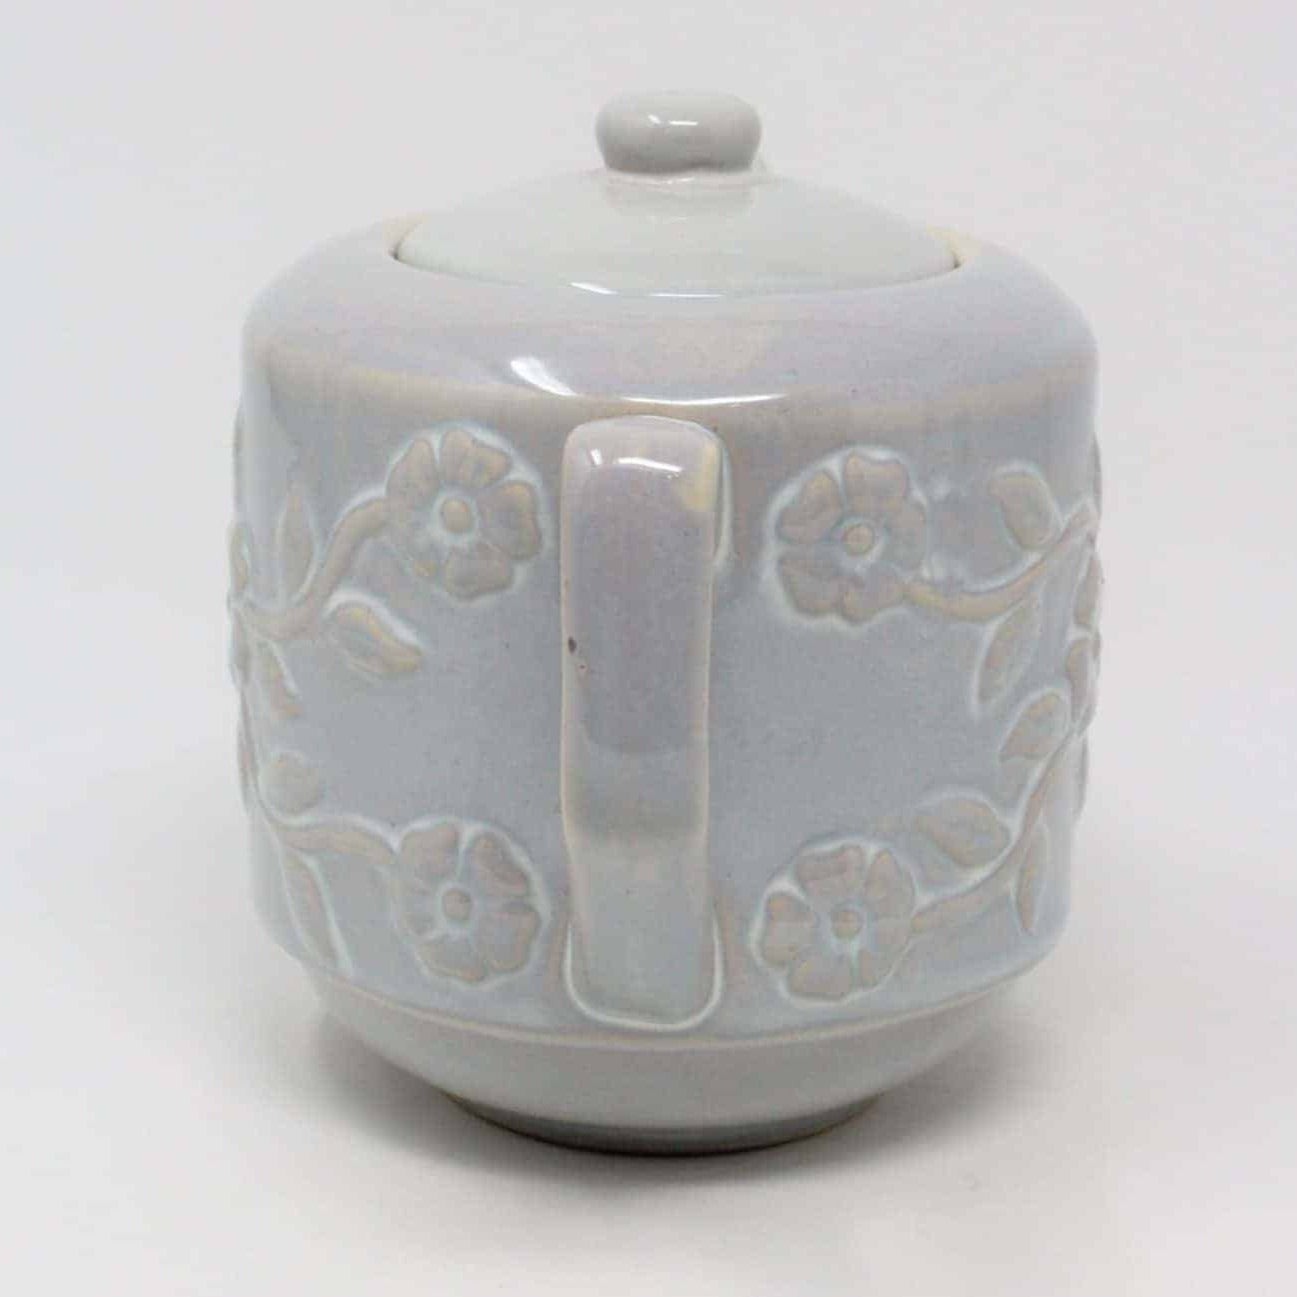 Teapot, Margaux, Floral Embossed, Gray Stoneware, China, Vintage